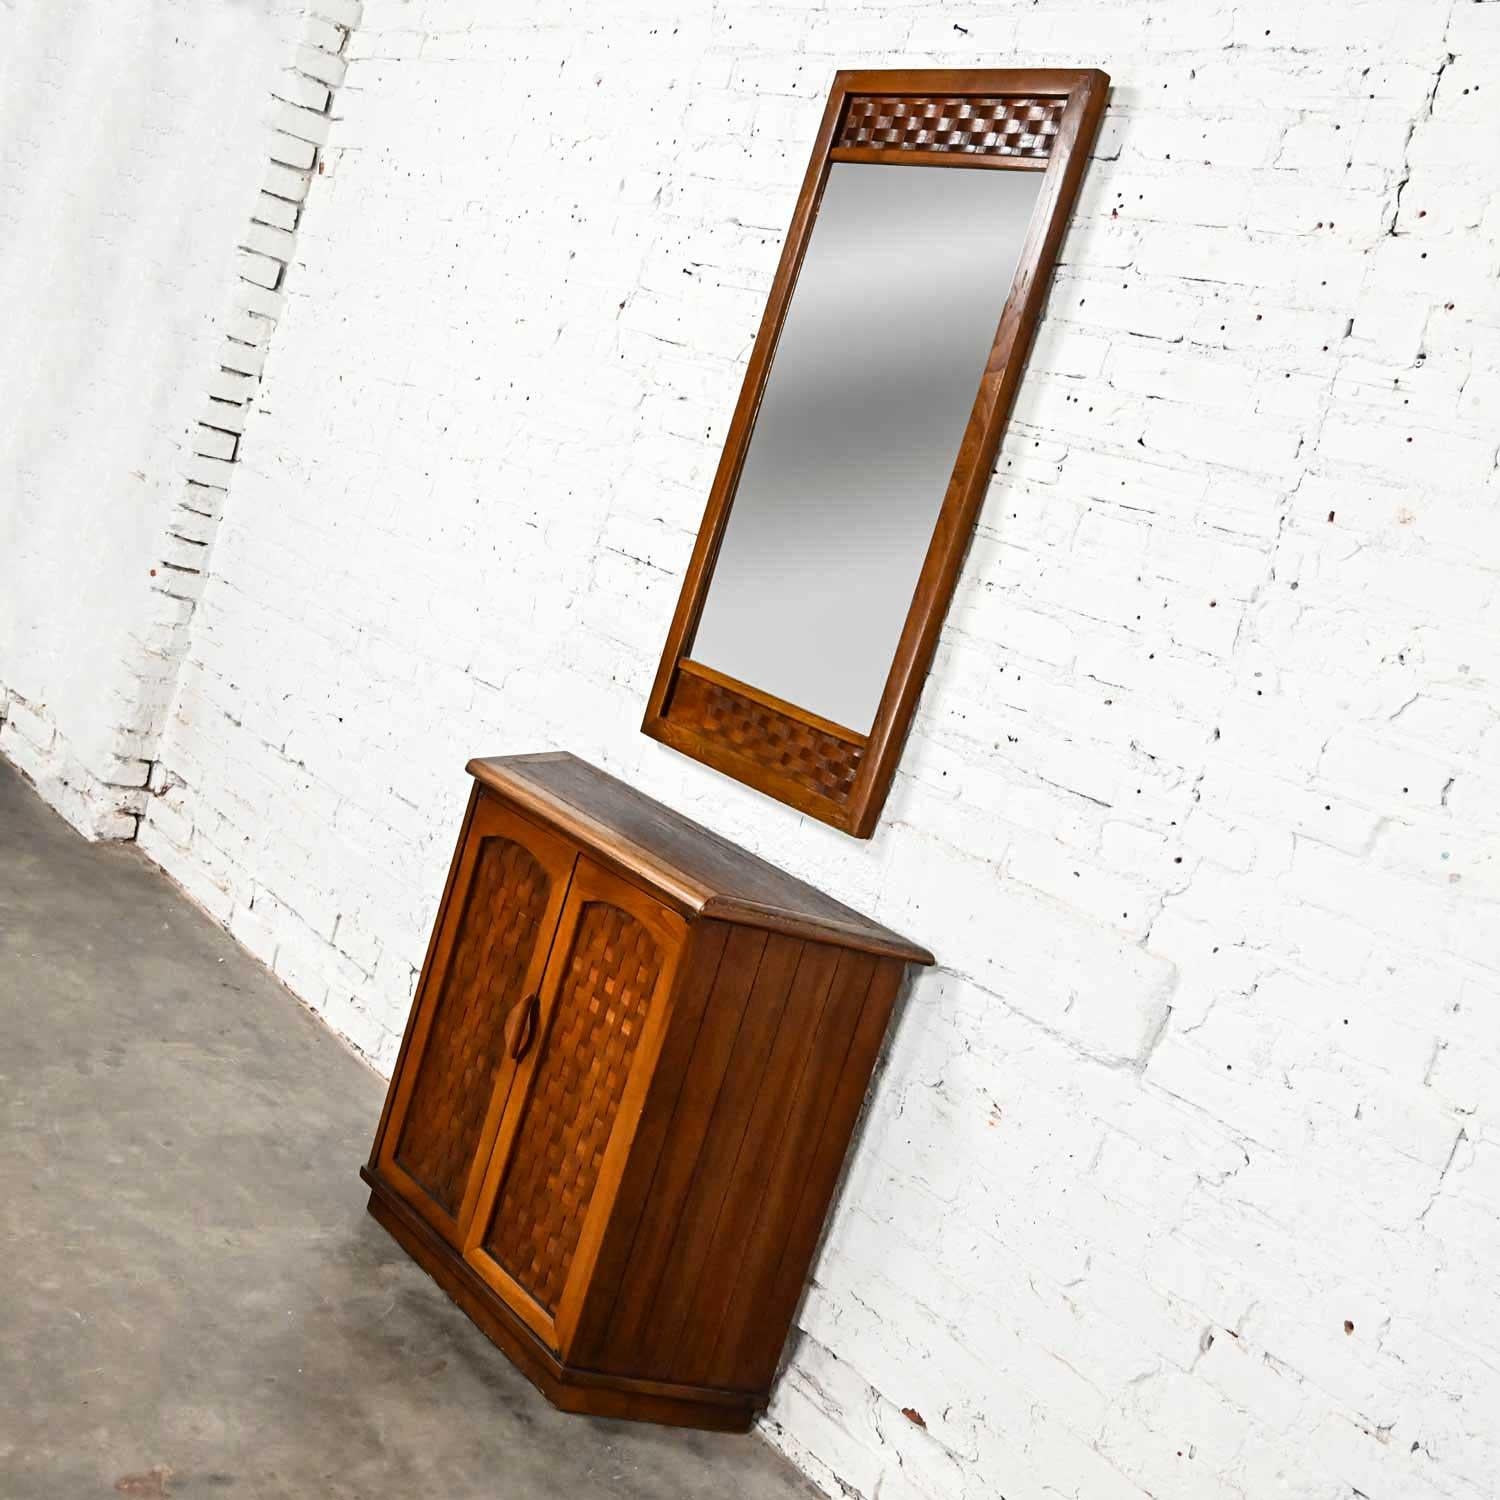 Handsome two-piece set comprised of an entry console cabinet and matching mirror with basket weave detail done in the style of Lane Furniture from their Perception line designed by Warren C. Church. These pieces do not have a Lane tag or mark.